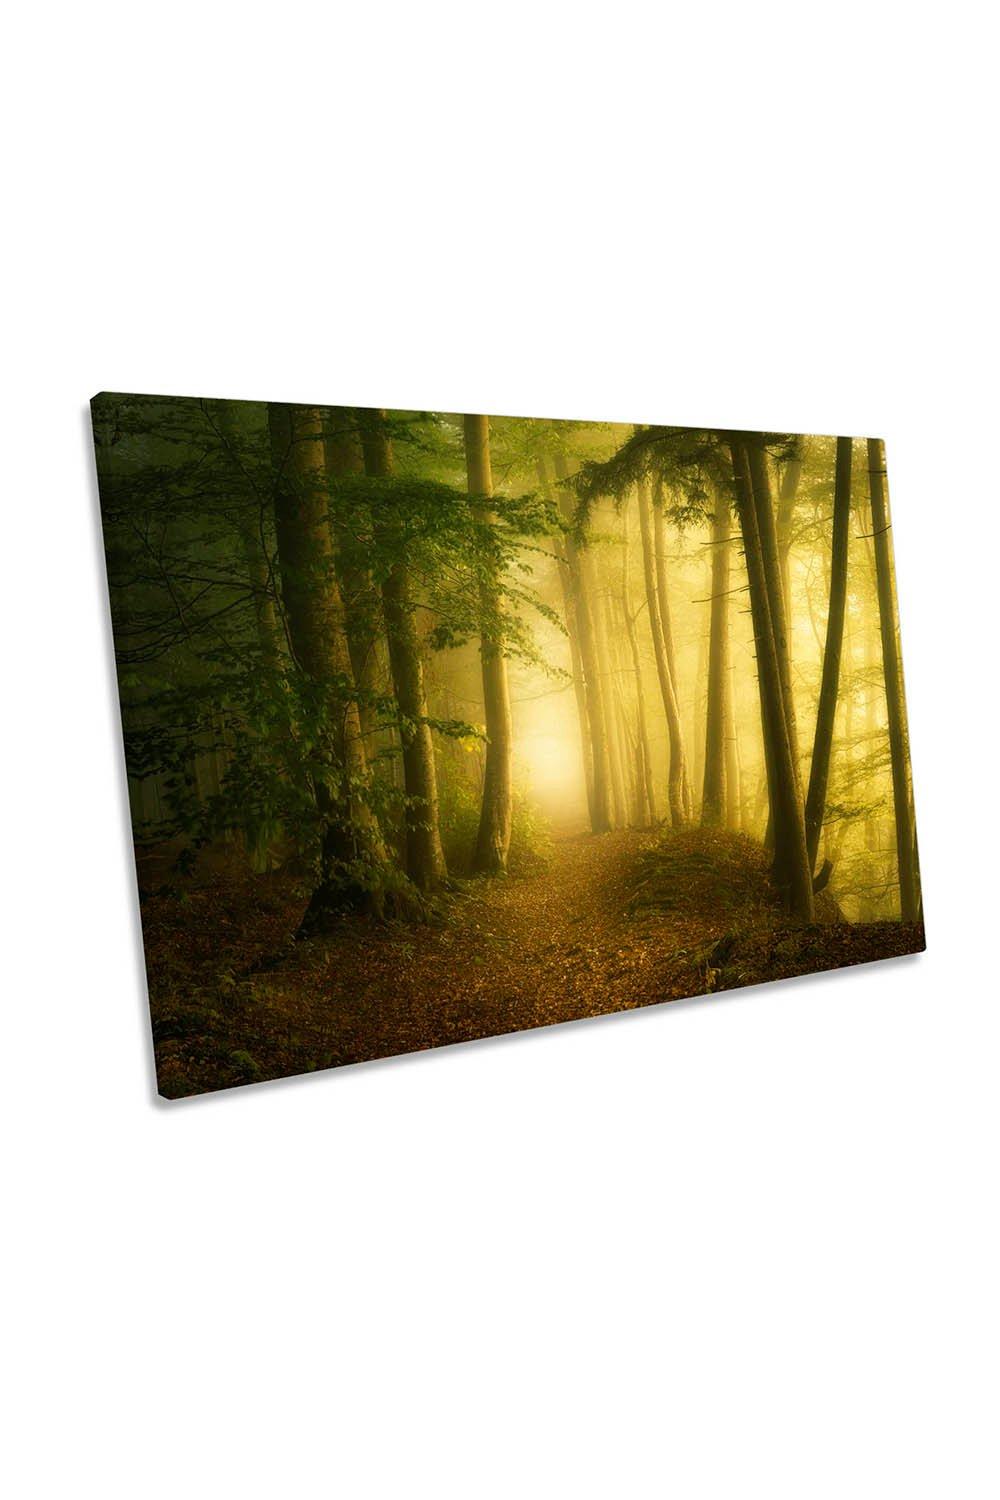 Mysterious Spring Morning Forest Canvas Wall Art Picture Print